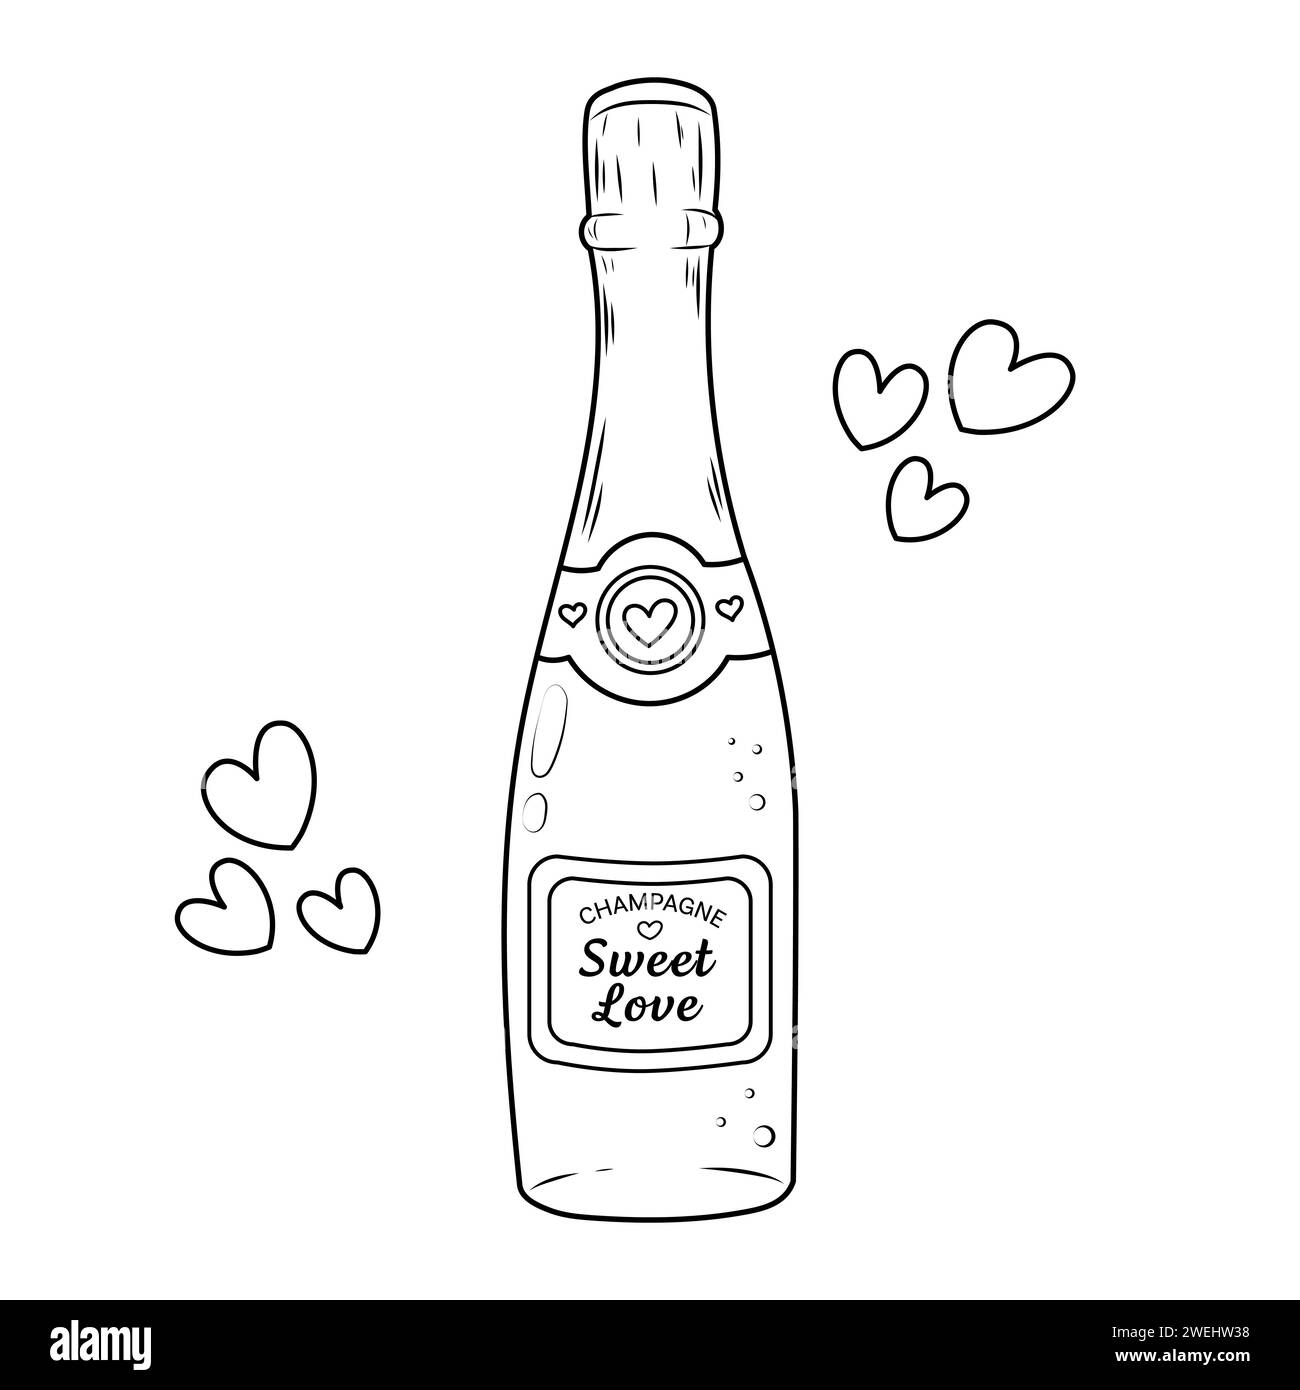 Vector illustration of champagne bottle for valentine's day. Sketch of festive bottle and hearts. Colouring book page Stock Vector